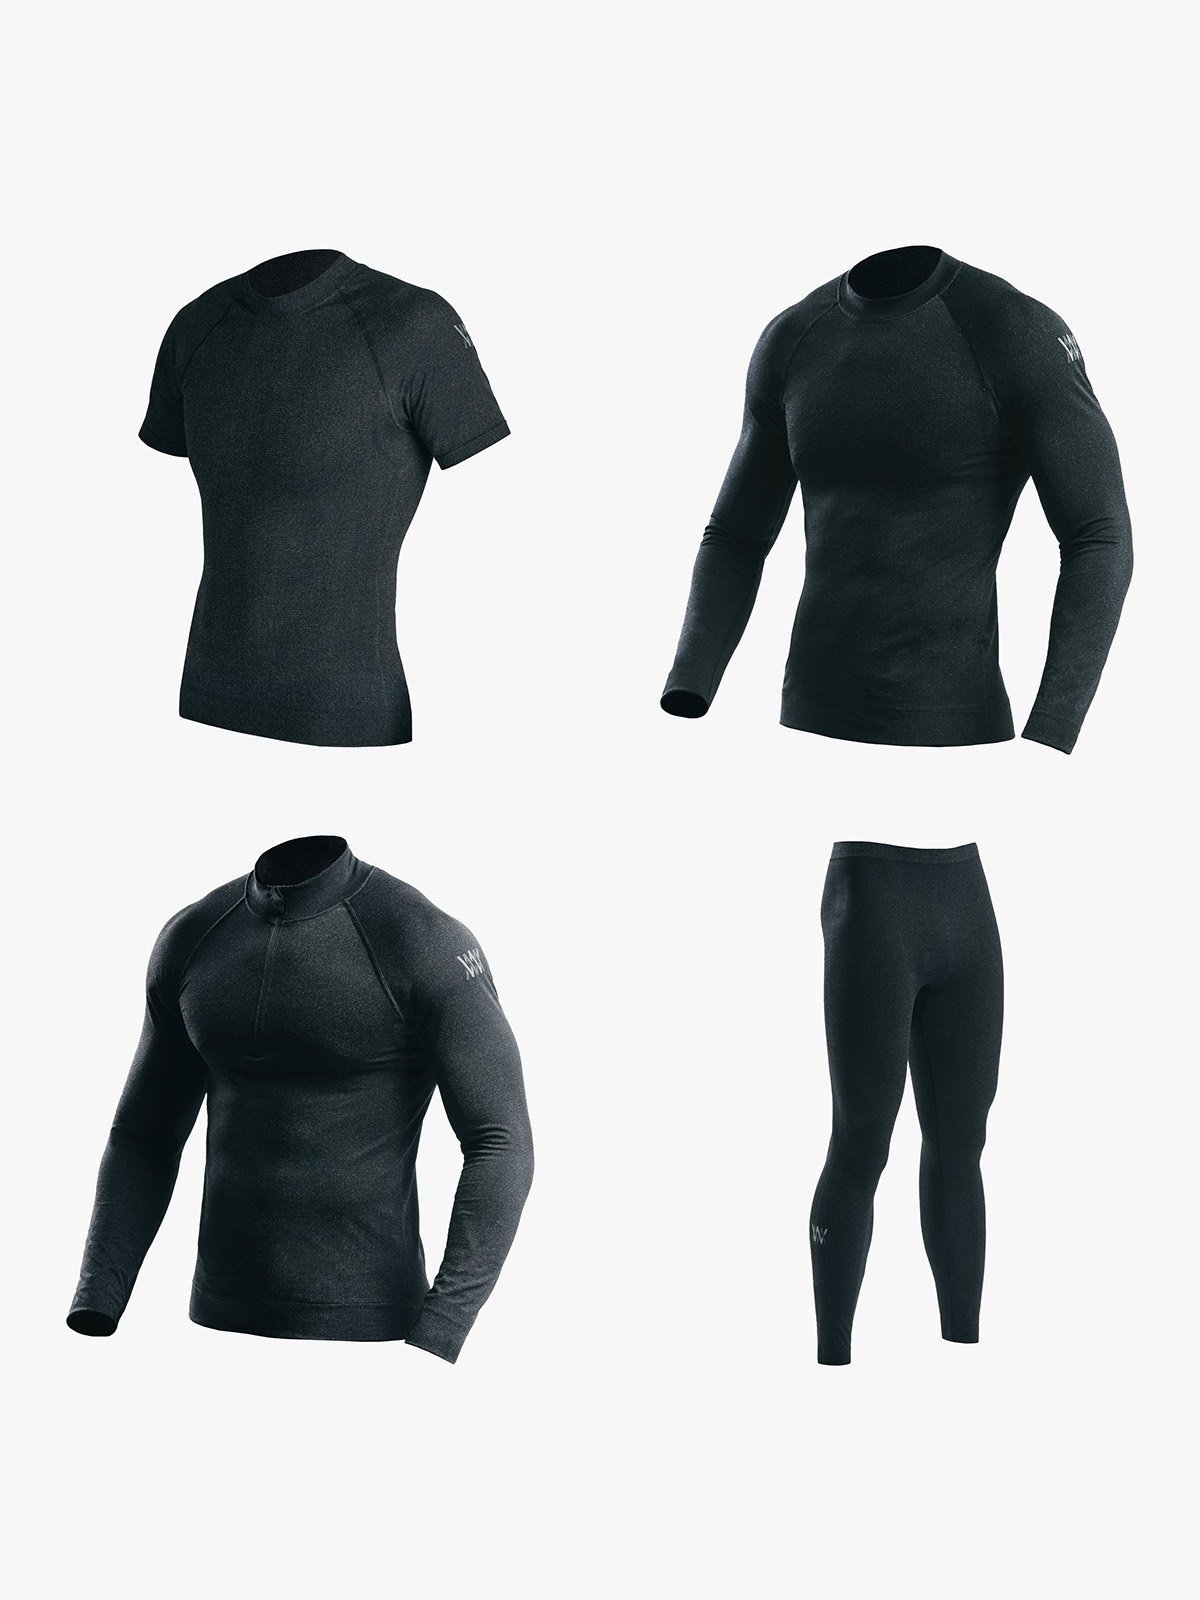 Advanced Projects® : Seamless Base Layers by Mission Workshop - Weatherproof Bags & Technical Apparel - San Francisco & Los Angeles - Built to endure - Guaranteed forever